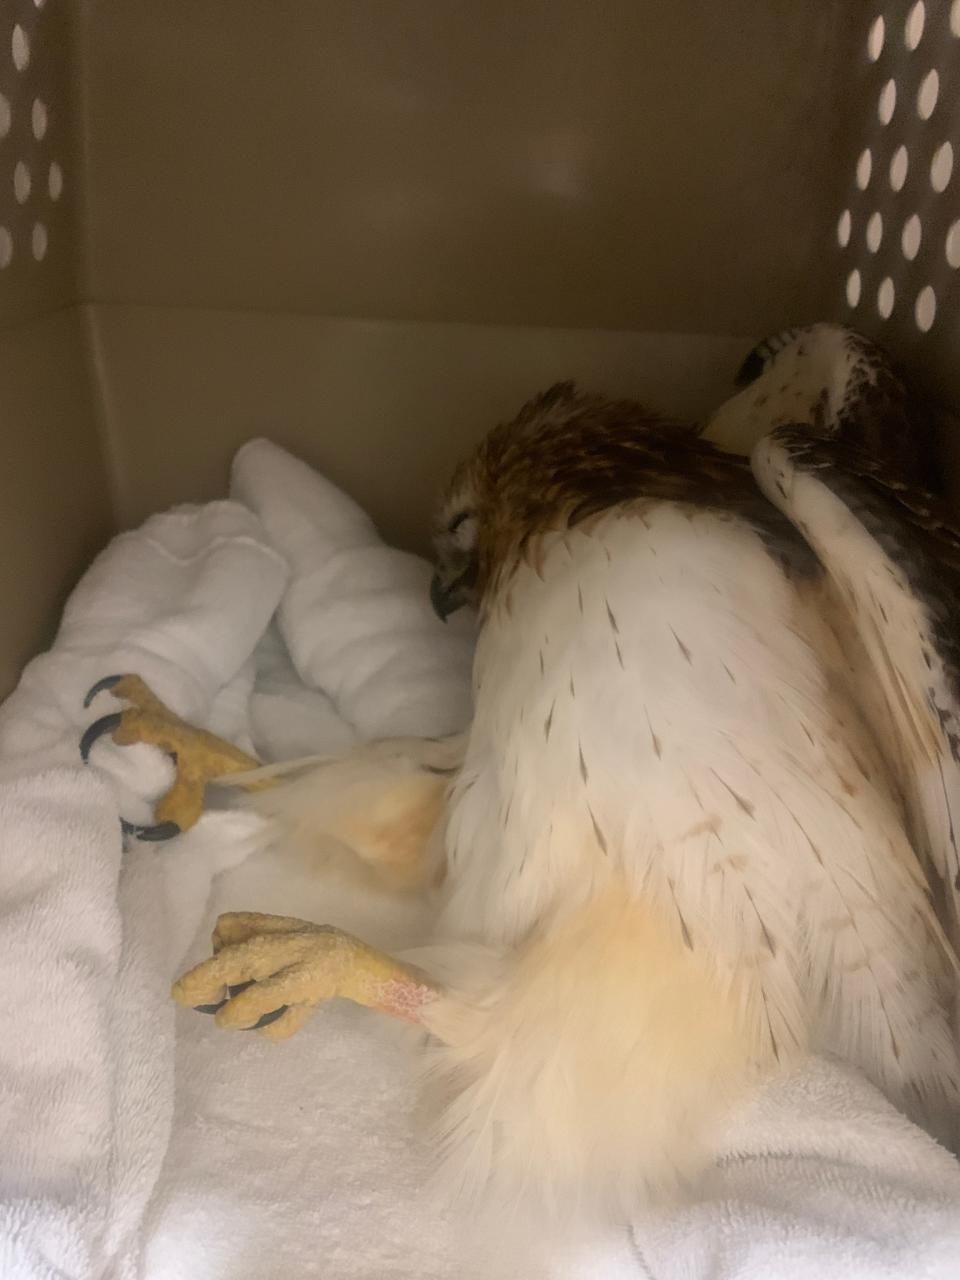 This red-tailed hawk is one of 13 positive cases of highly pathogenic avian influenza the Rocky Mountain Raptor Program has seen in the past month at its Fort Collins, Colo., facility.